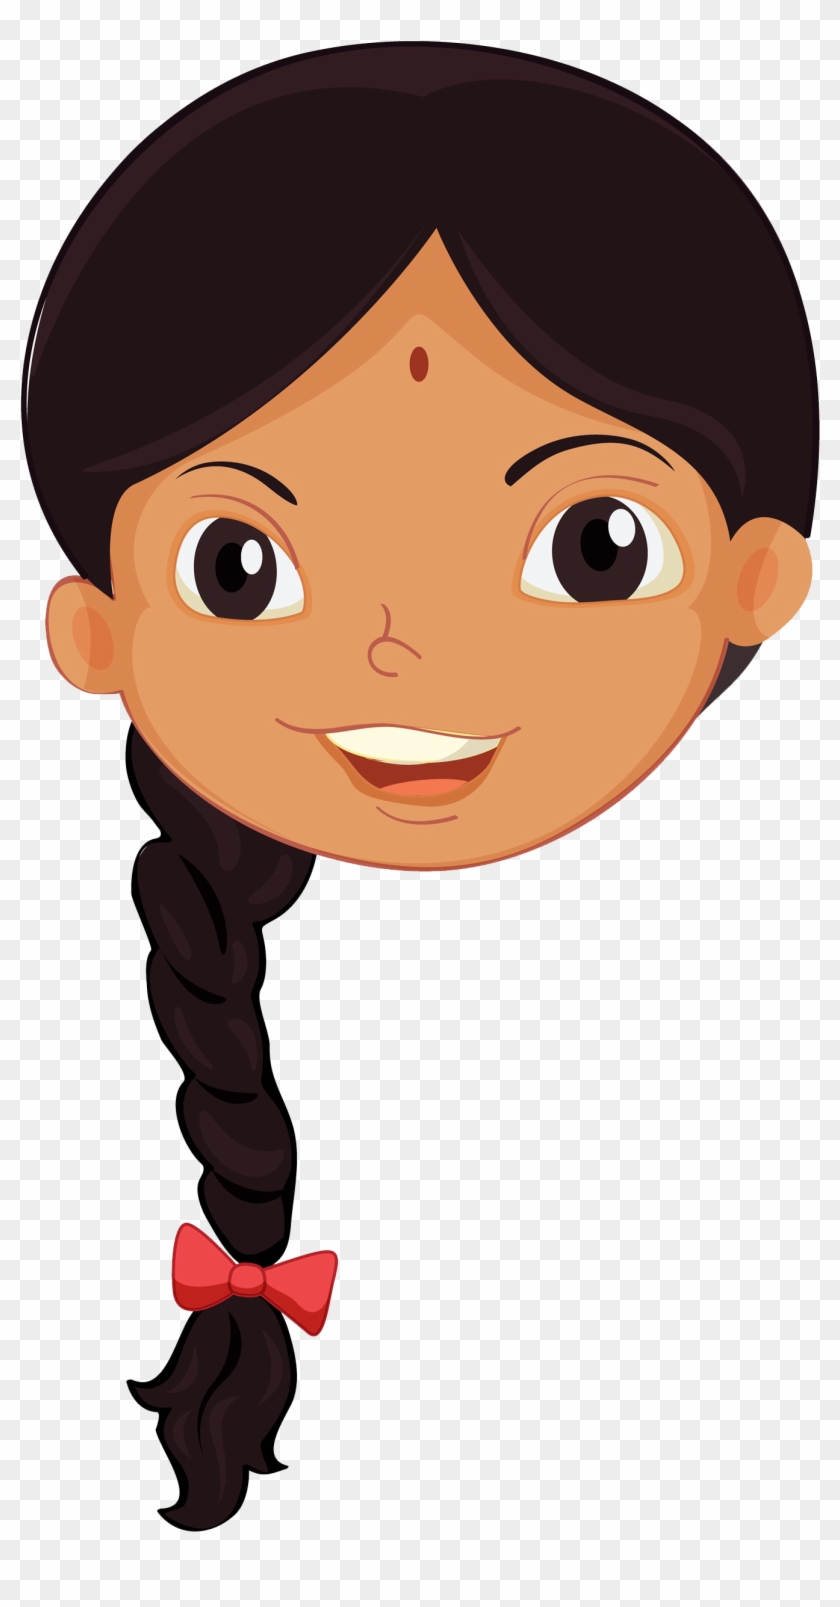 Indian People Girl Clip Art - Indian Girl Face Cartoon - Free Transparent  PNG Clipart Images Download